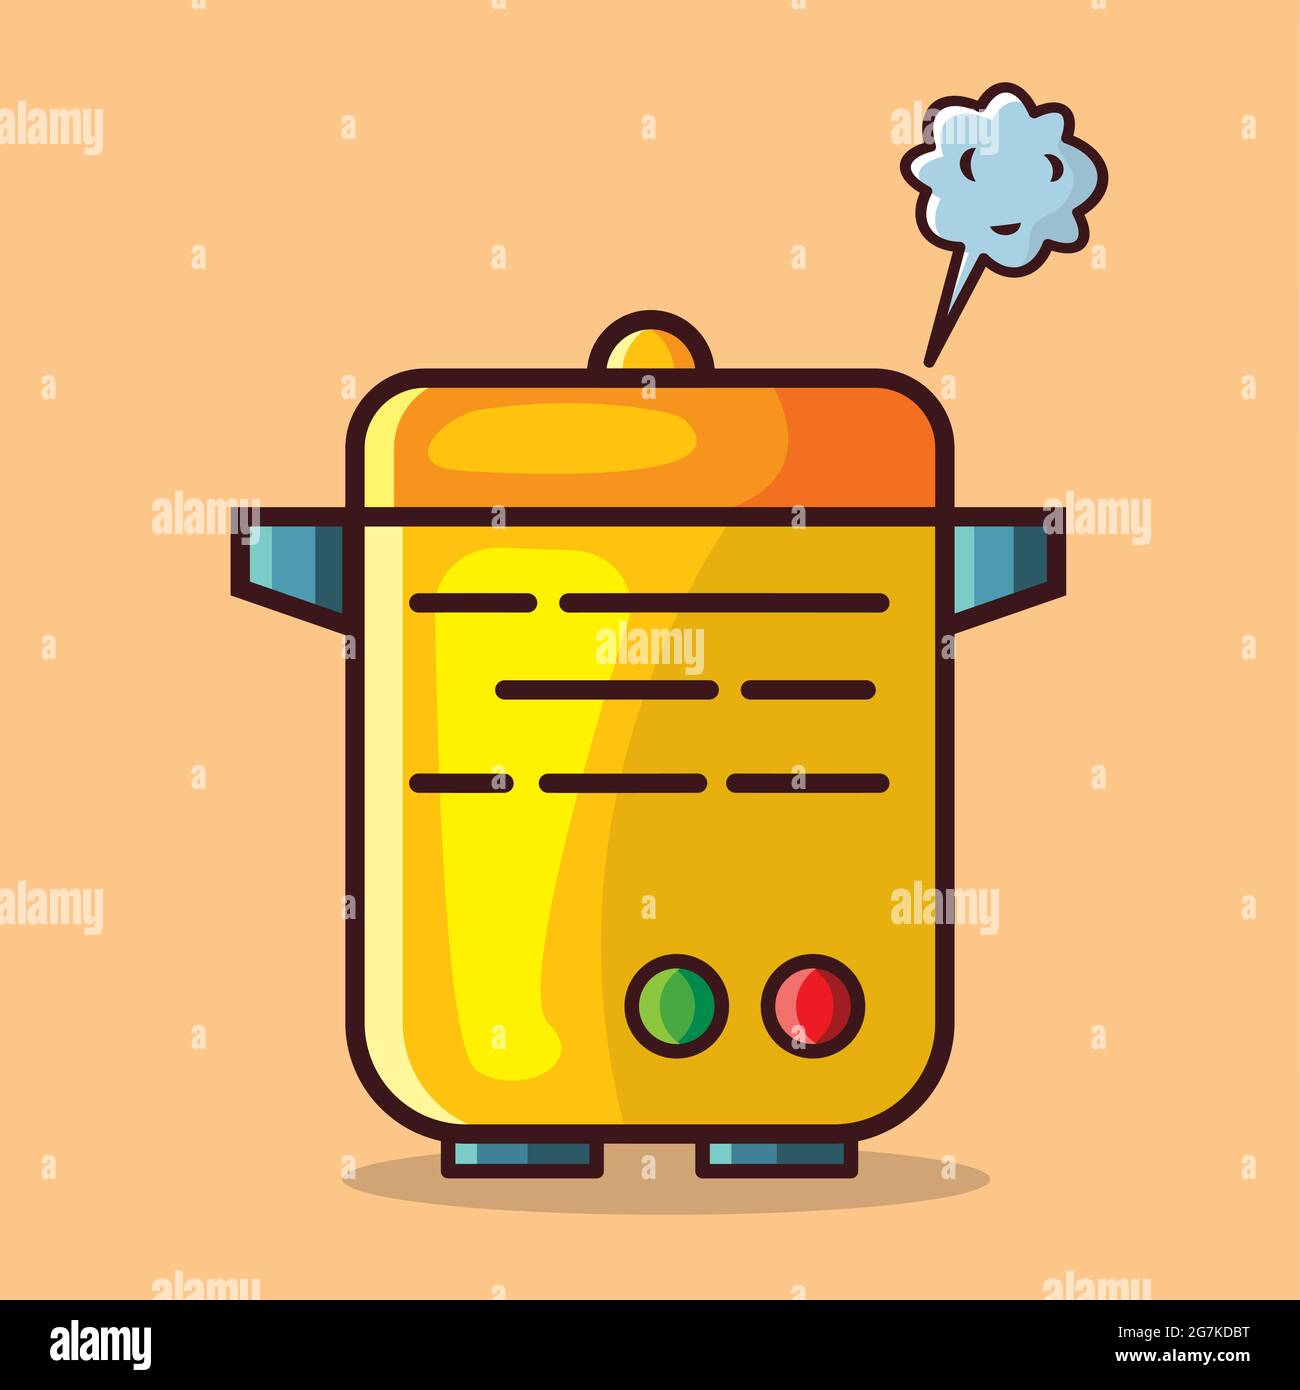 Premium Vector  Blue and yellow cute rice cooker illustration